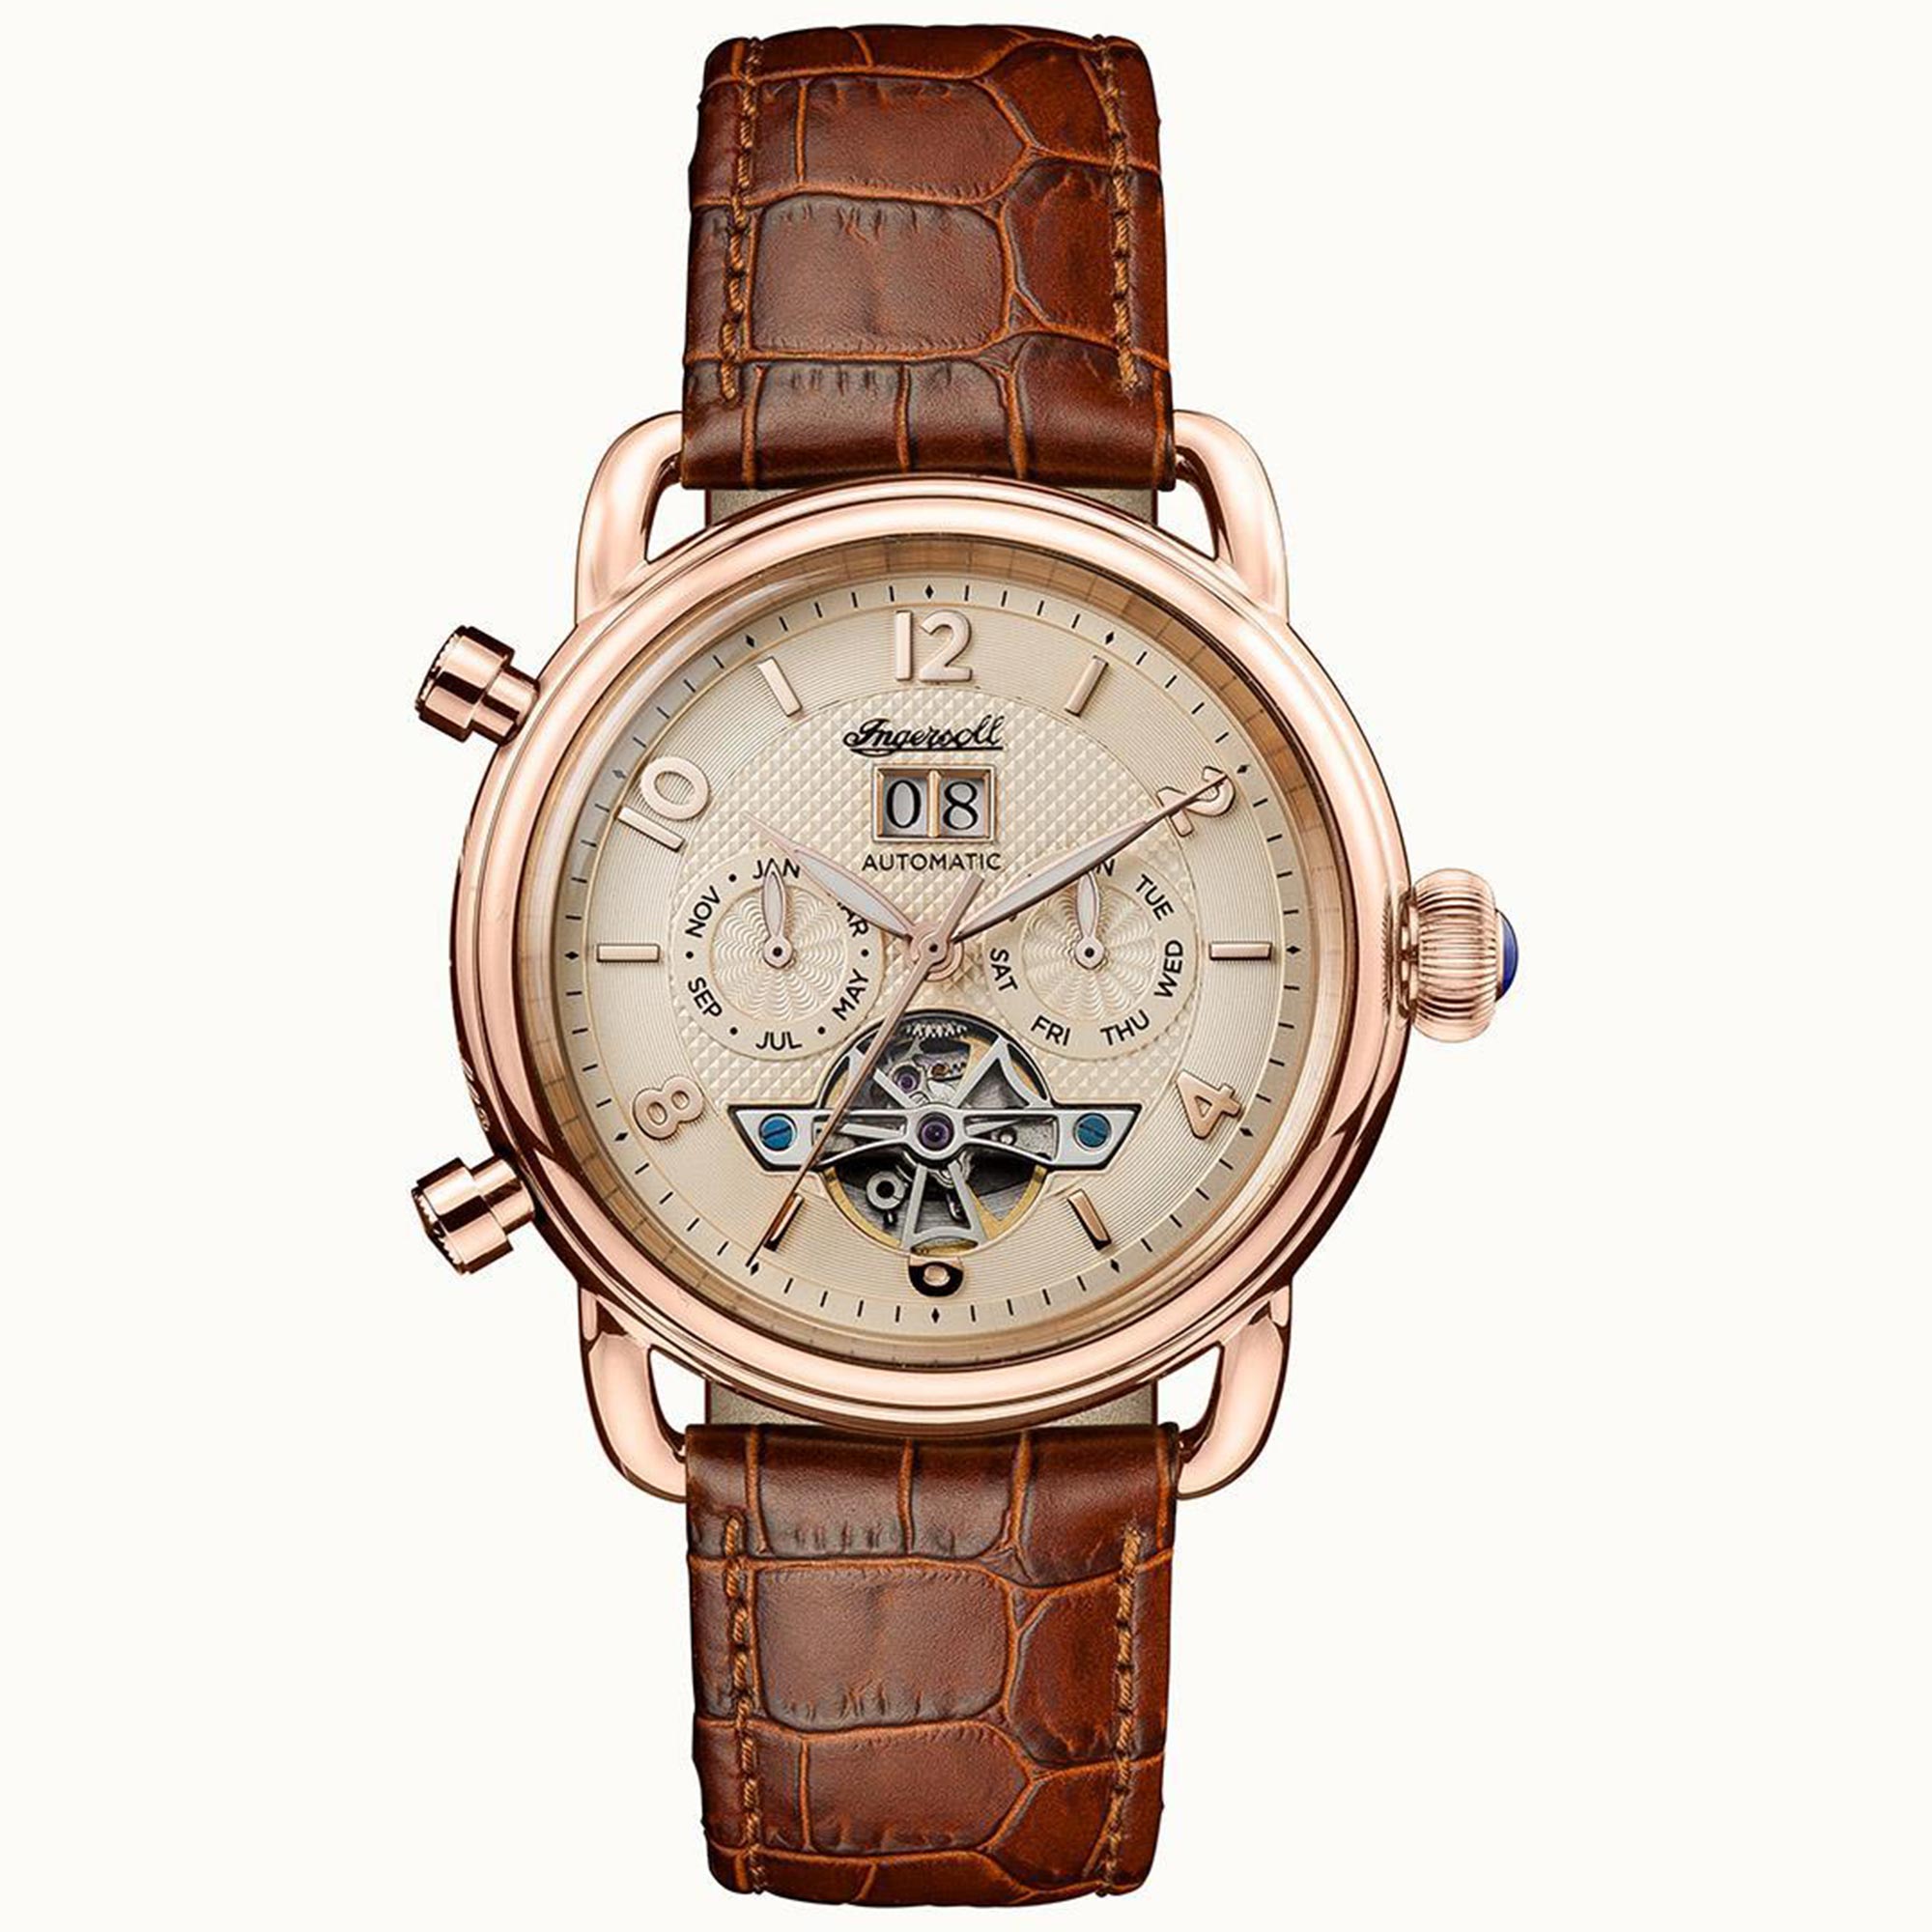 Ingersoll New England Automatic Cream Dial Brown Leather Strap Mens Watch I00901